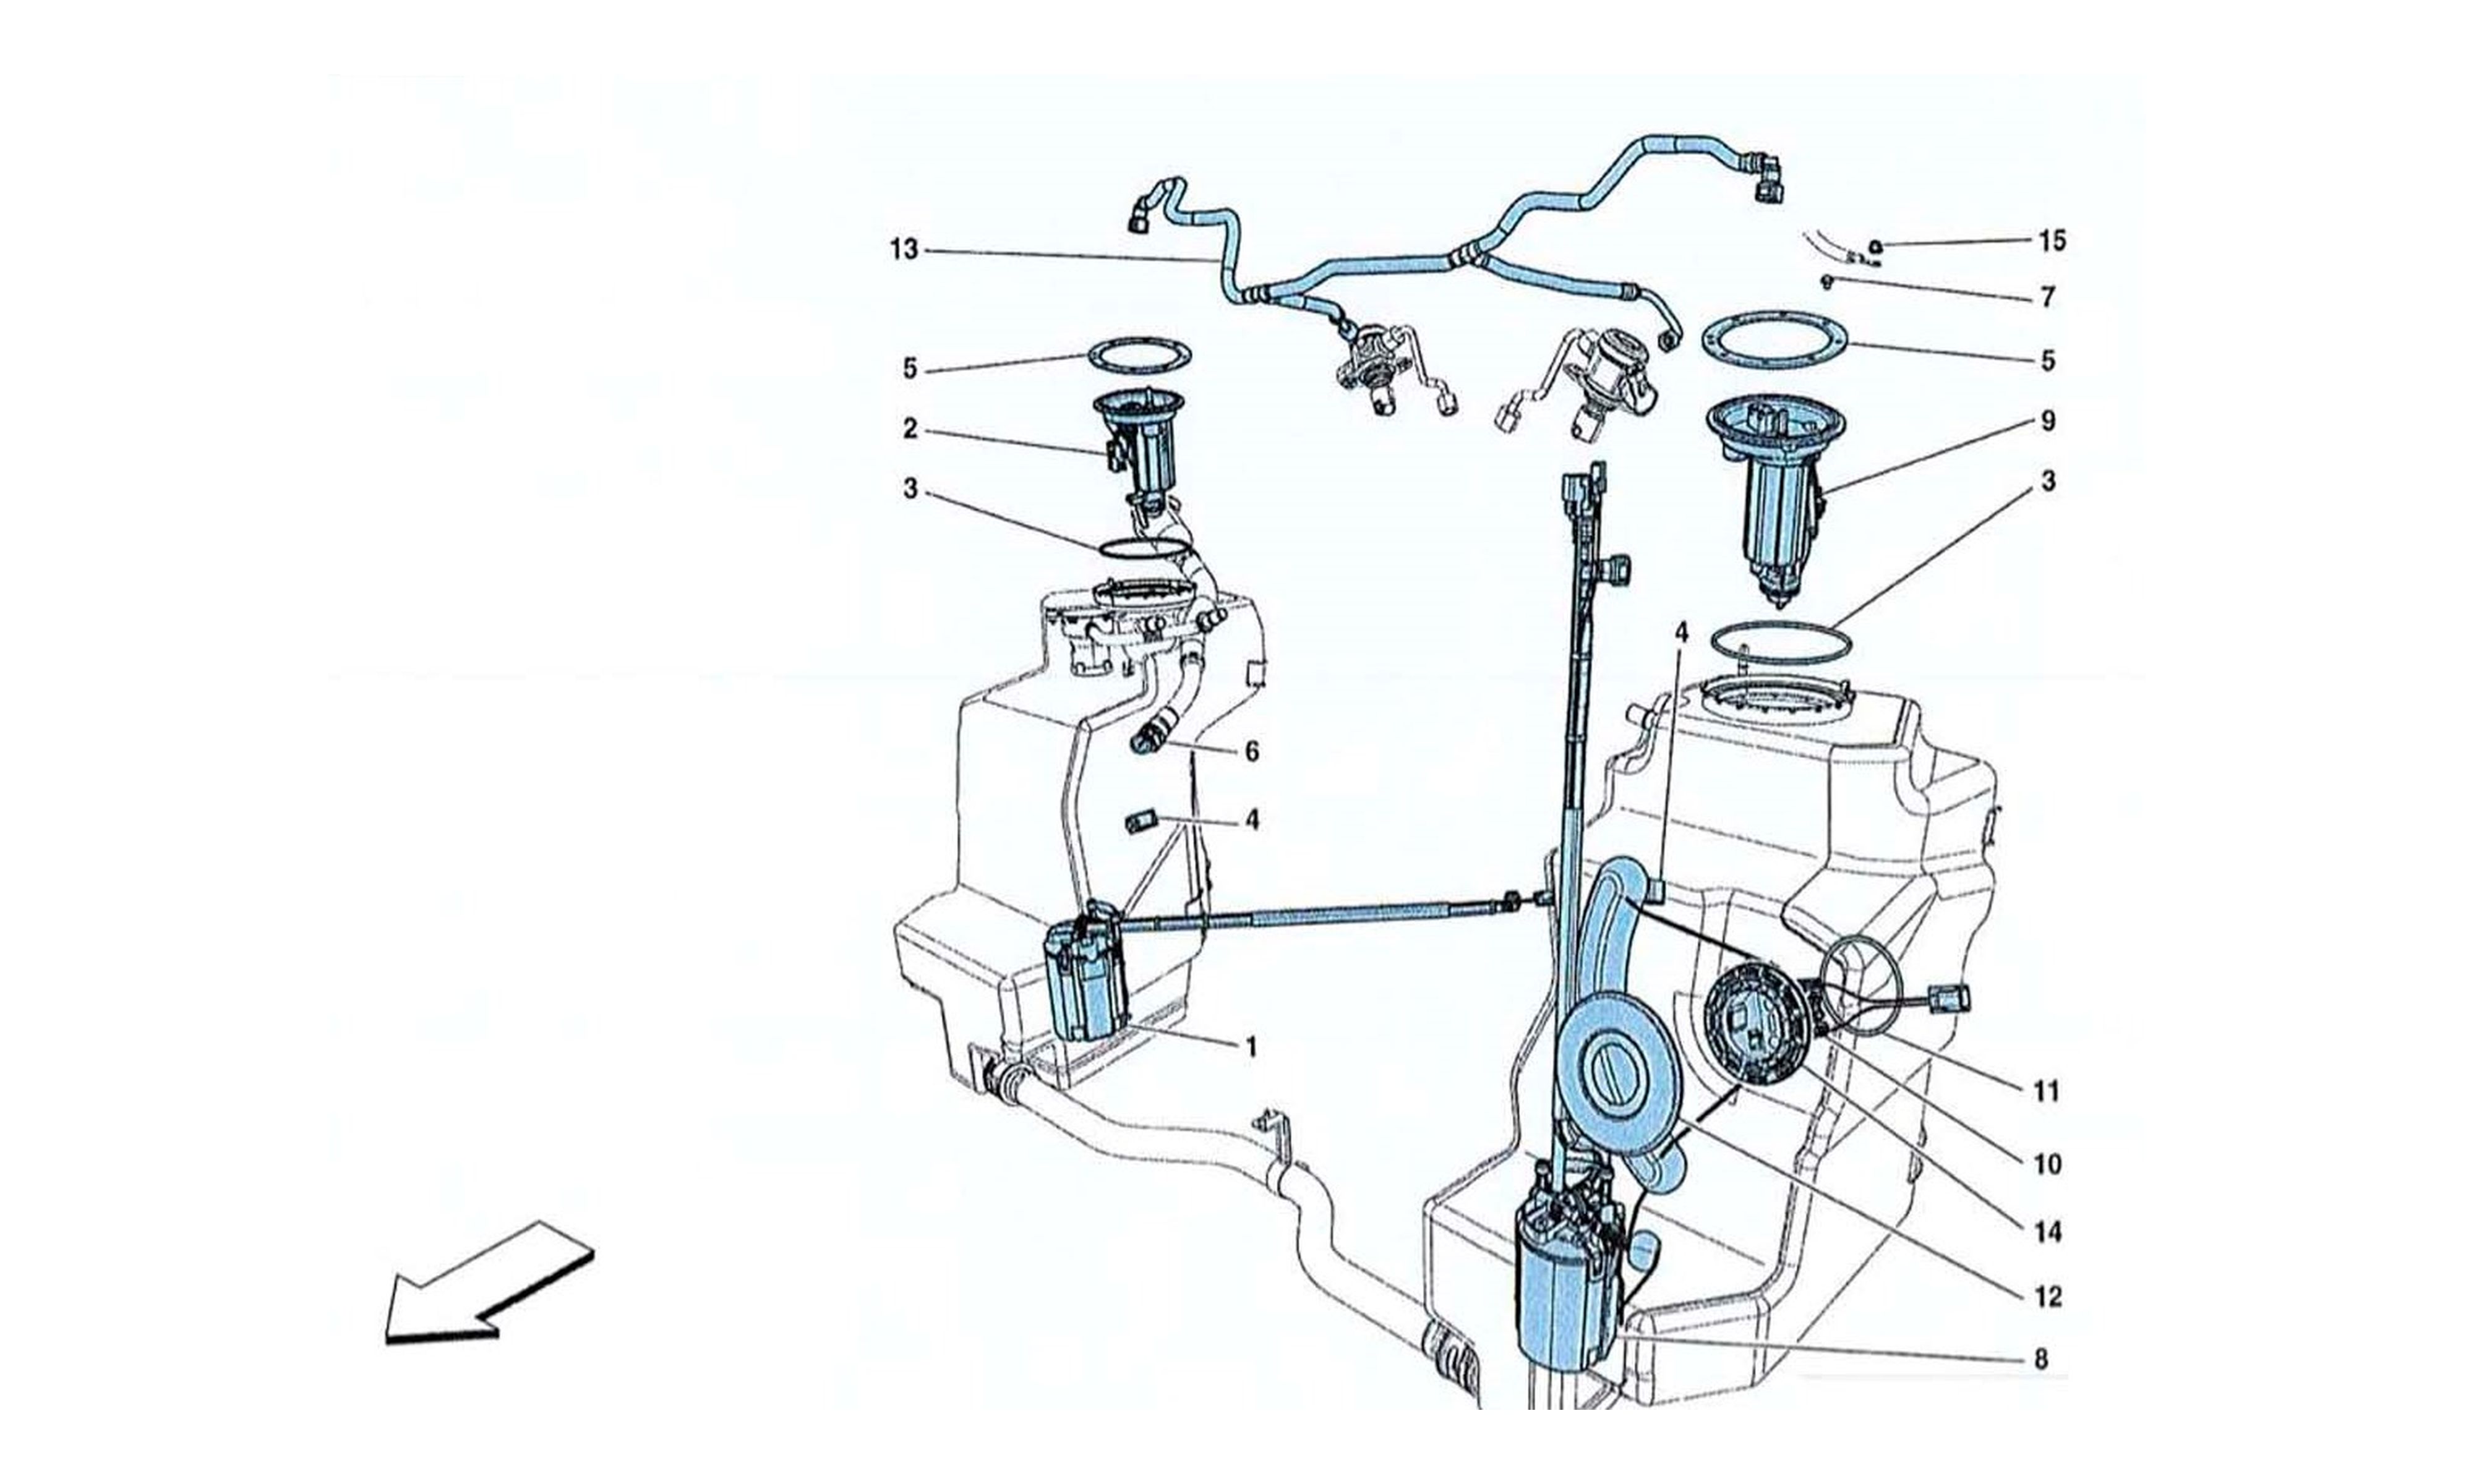 Schematic: Fuel System Pumps And Pipes